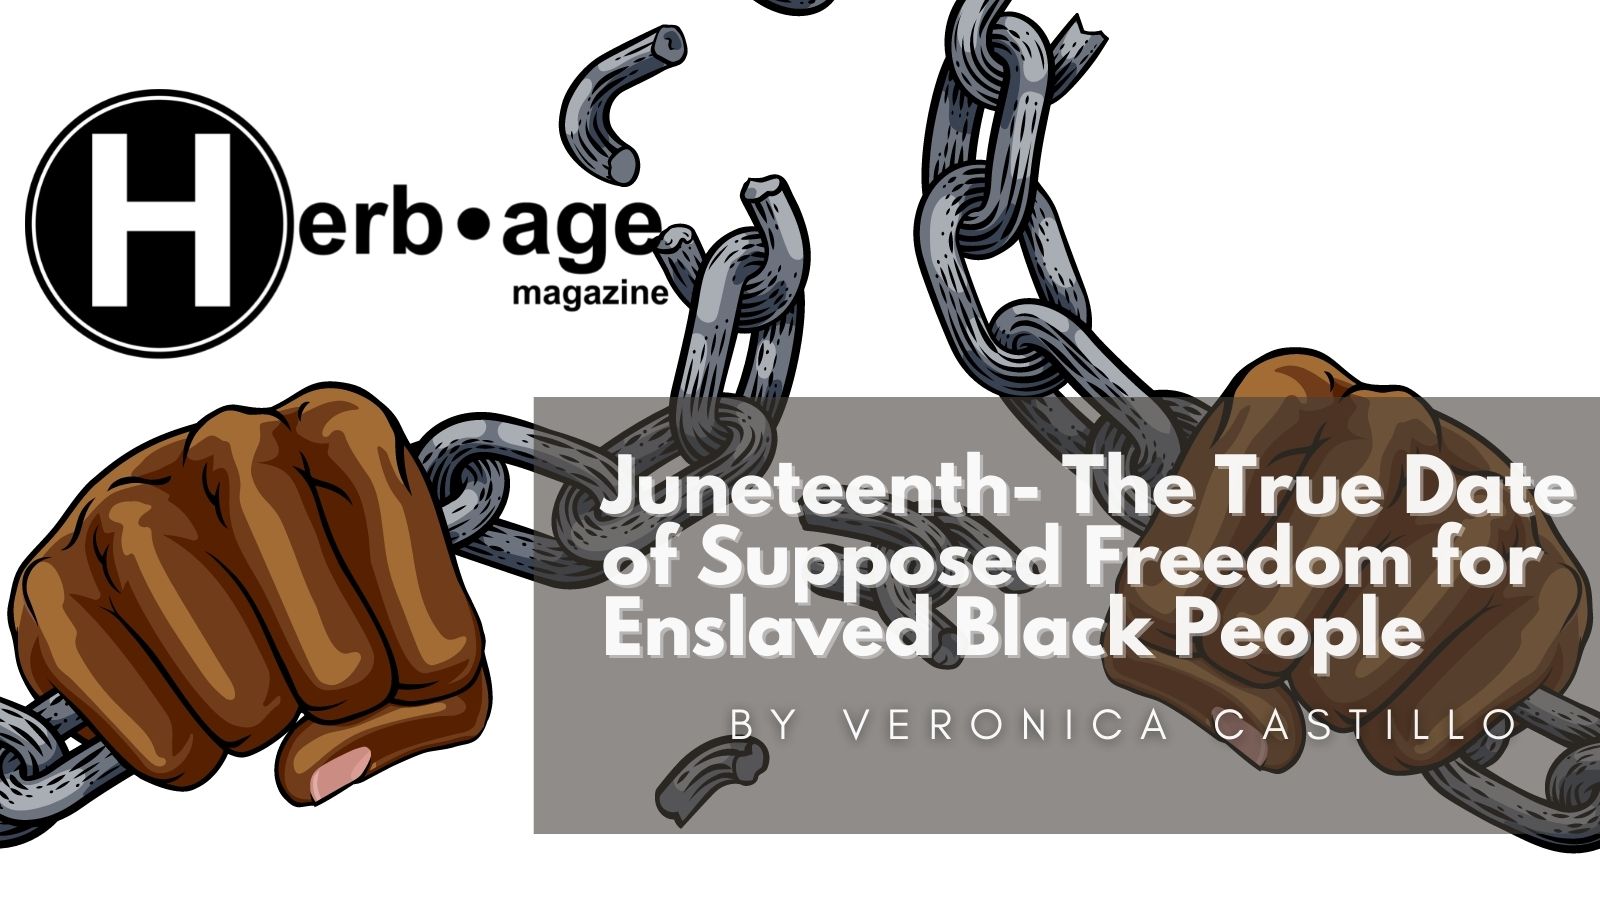 Juneteenth- The True Date of Supposed Freedom for Enslaved Black People